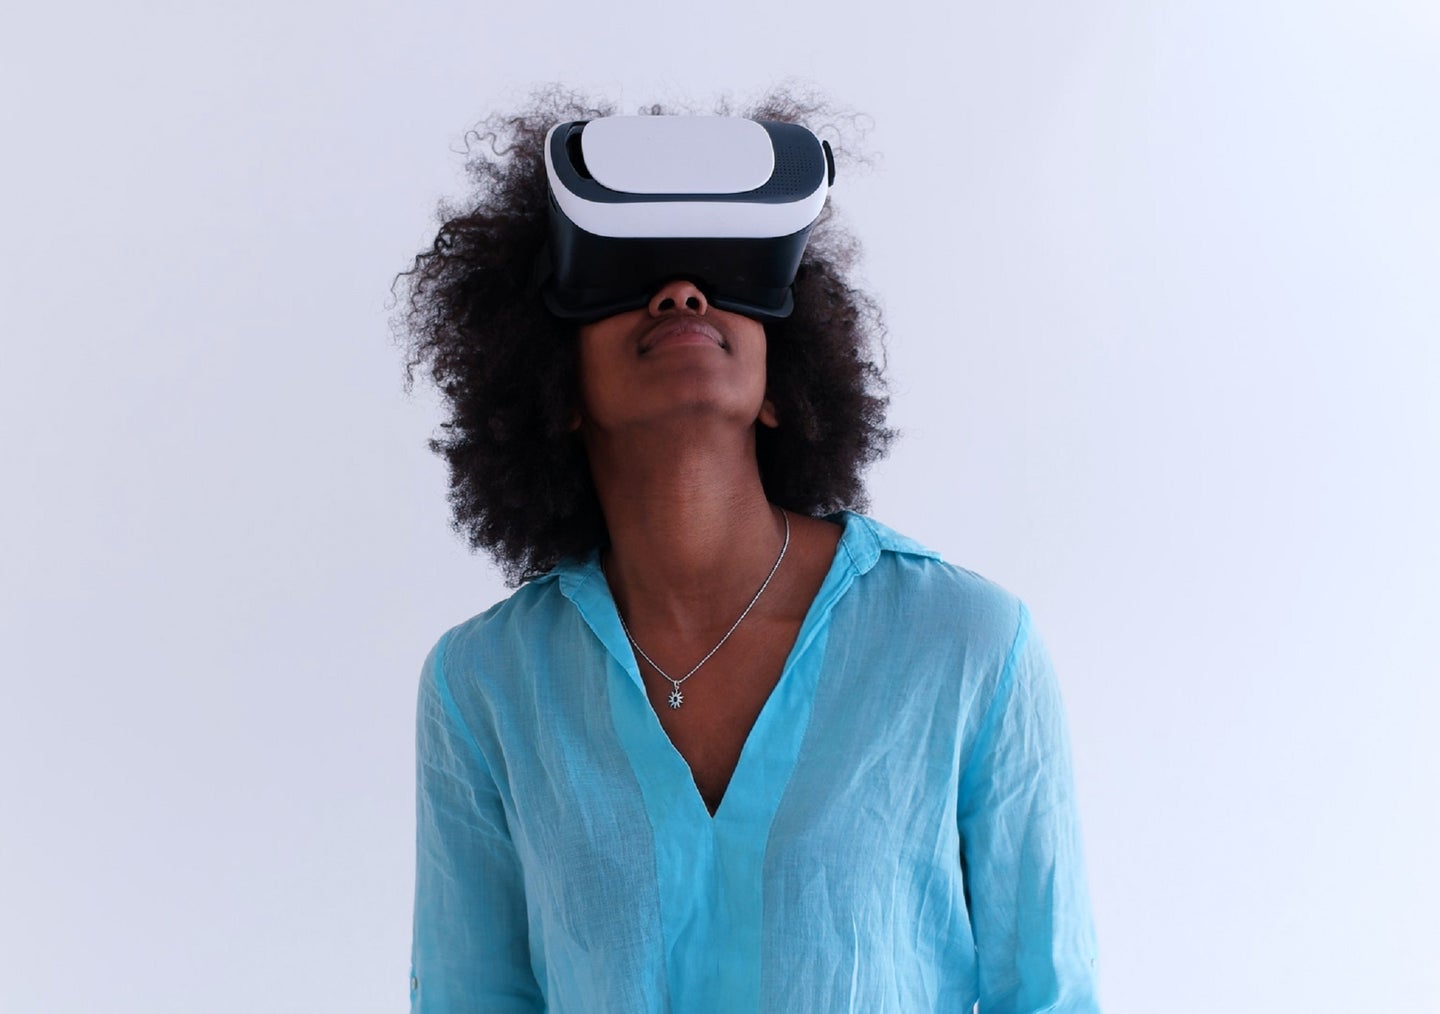 Black person with long natural hair using a VR headset to enter the metaverse